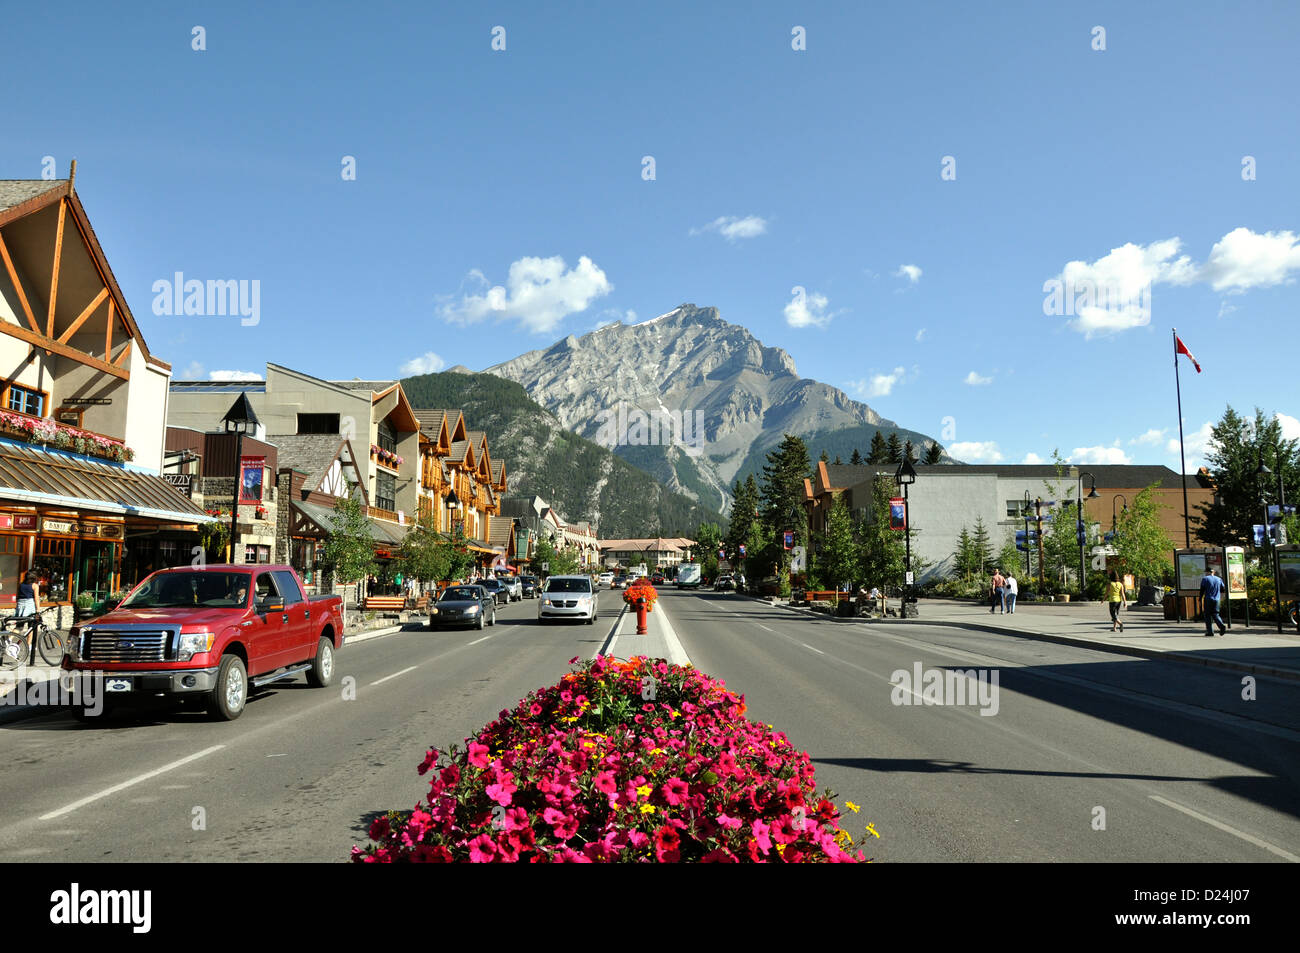 BANFF, CANADA - AUGUST 04: street view of famous Banff Avenue in a sunny summer day on Augist 04, 2011 in Banff, Alberta Stock Photo